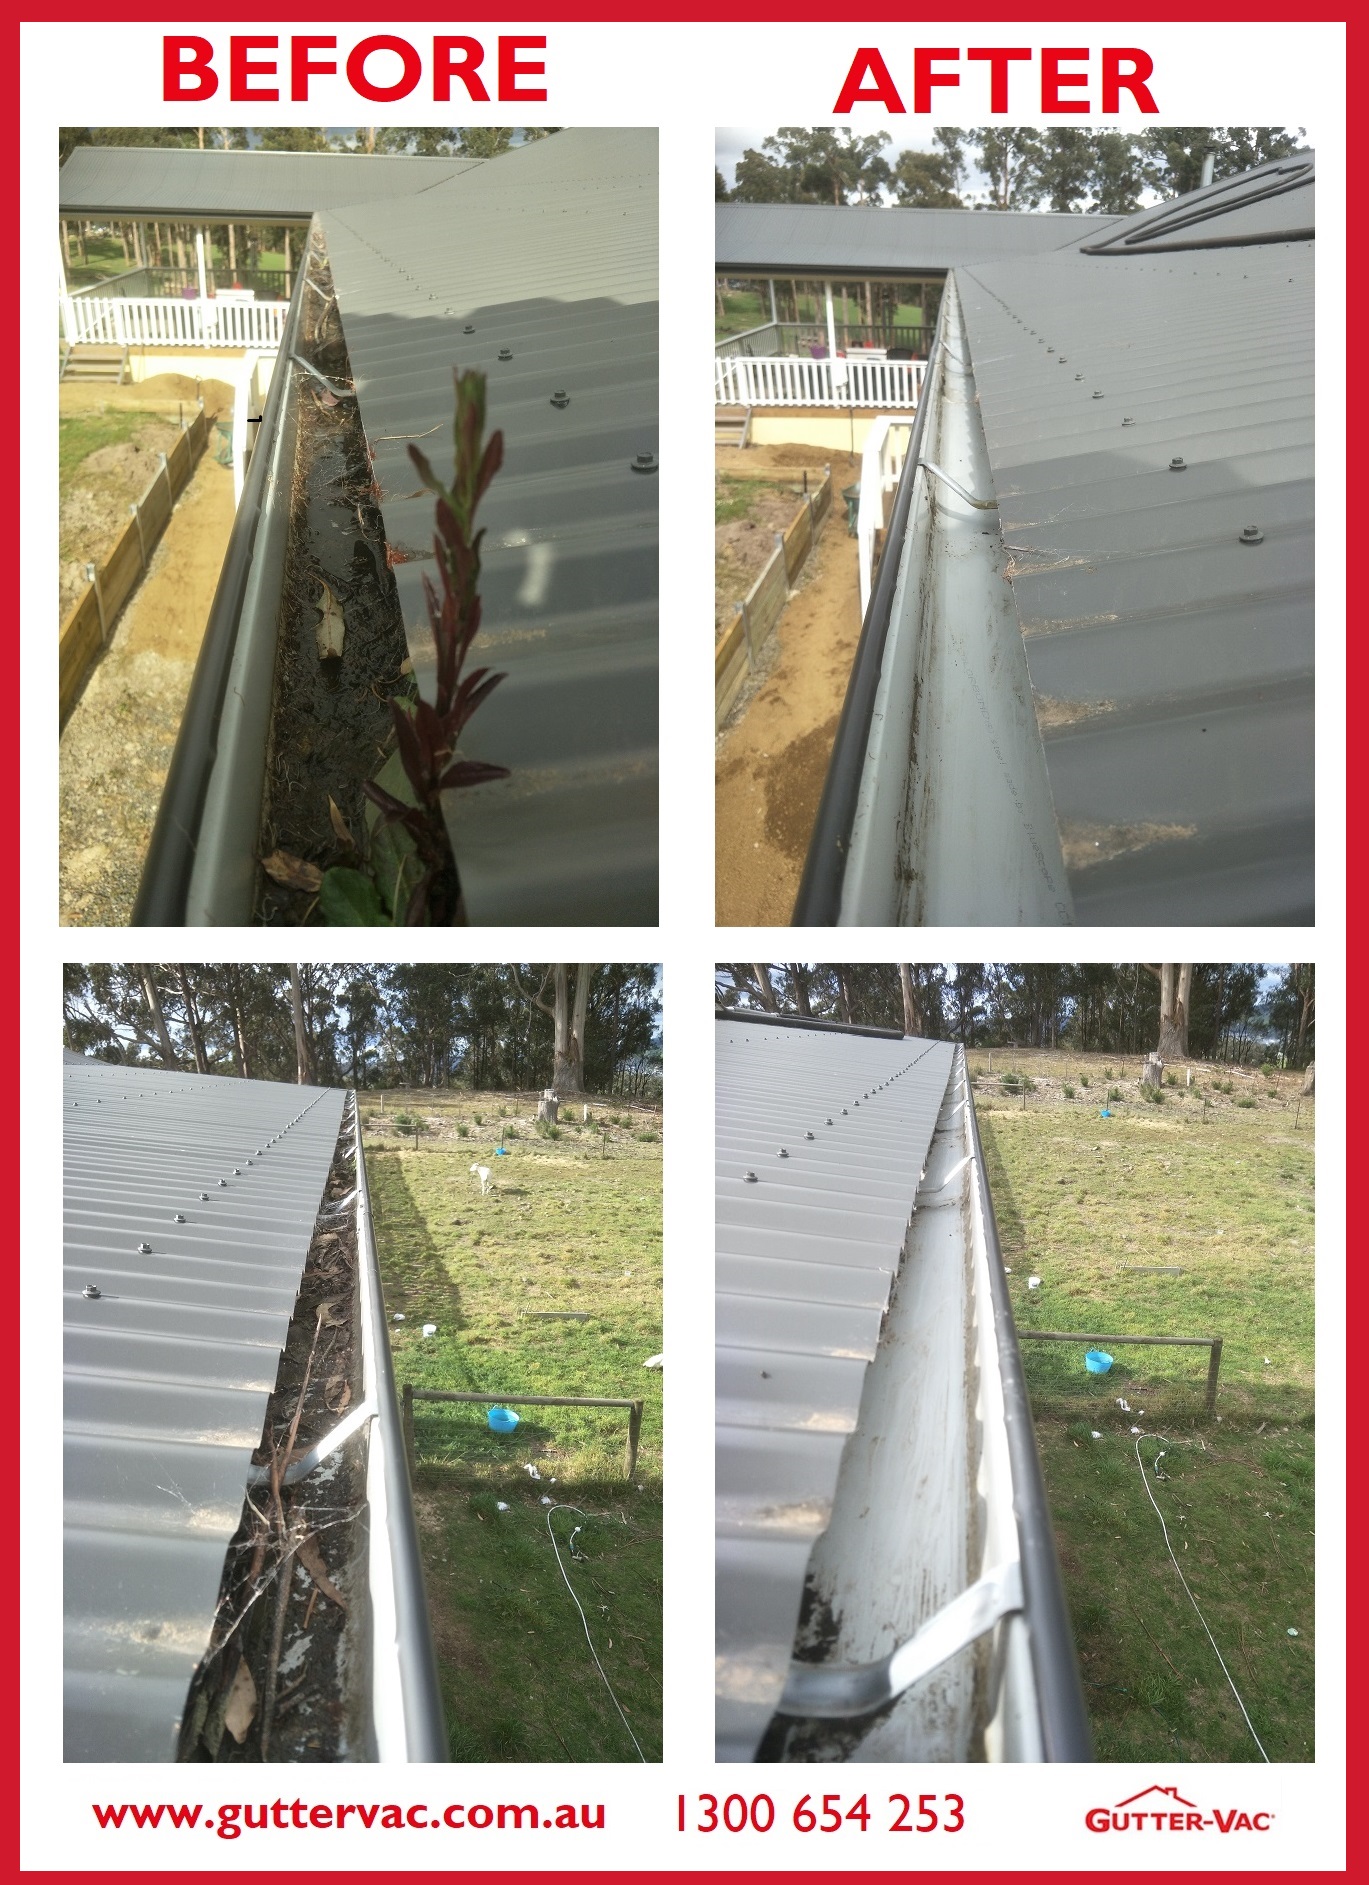 Gutters Fill With Debris Over The Year. Do You Need Your Gutters Cleaned Before Winter And The Rain Sets In?